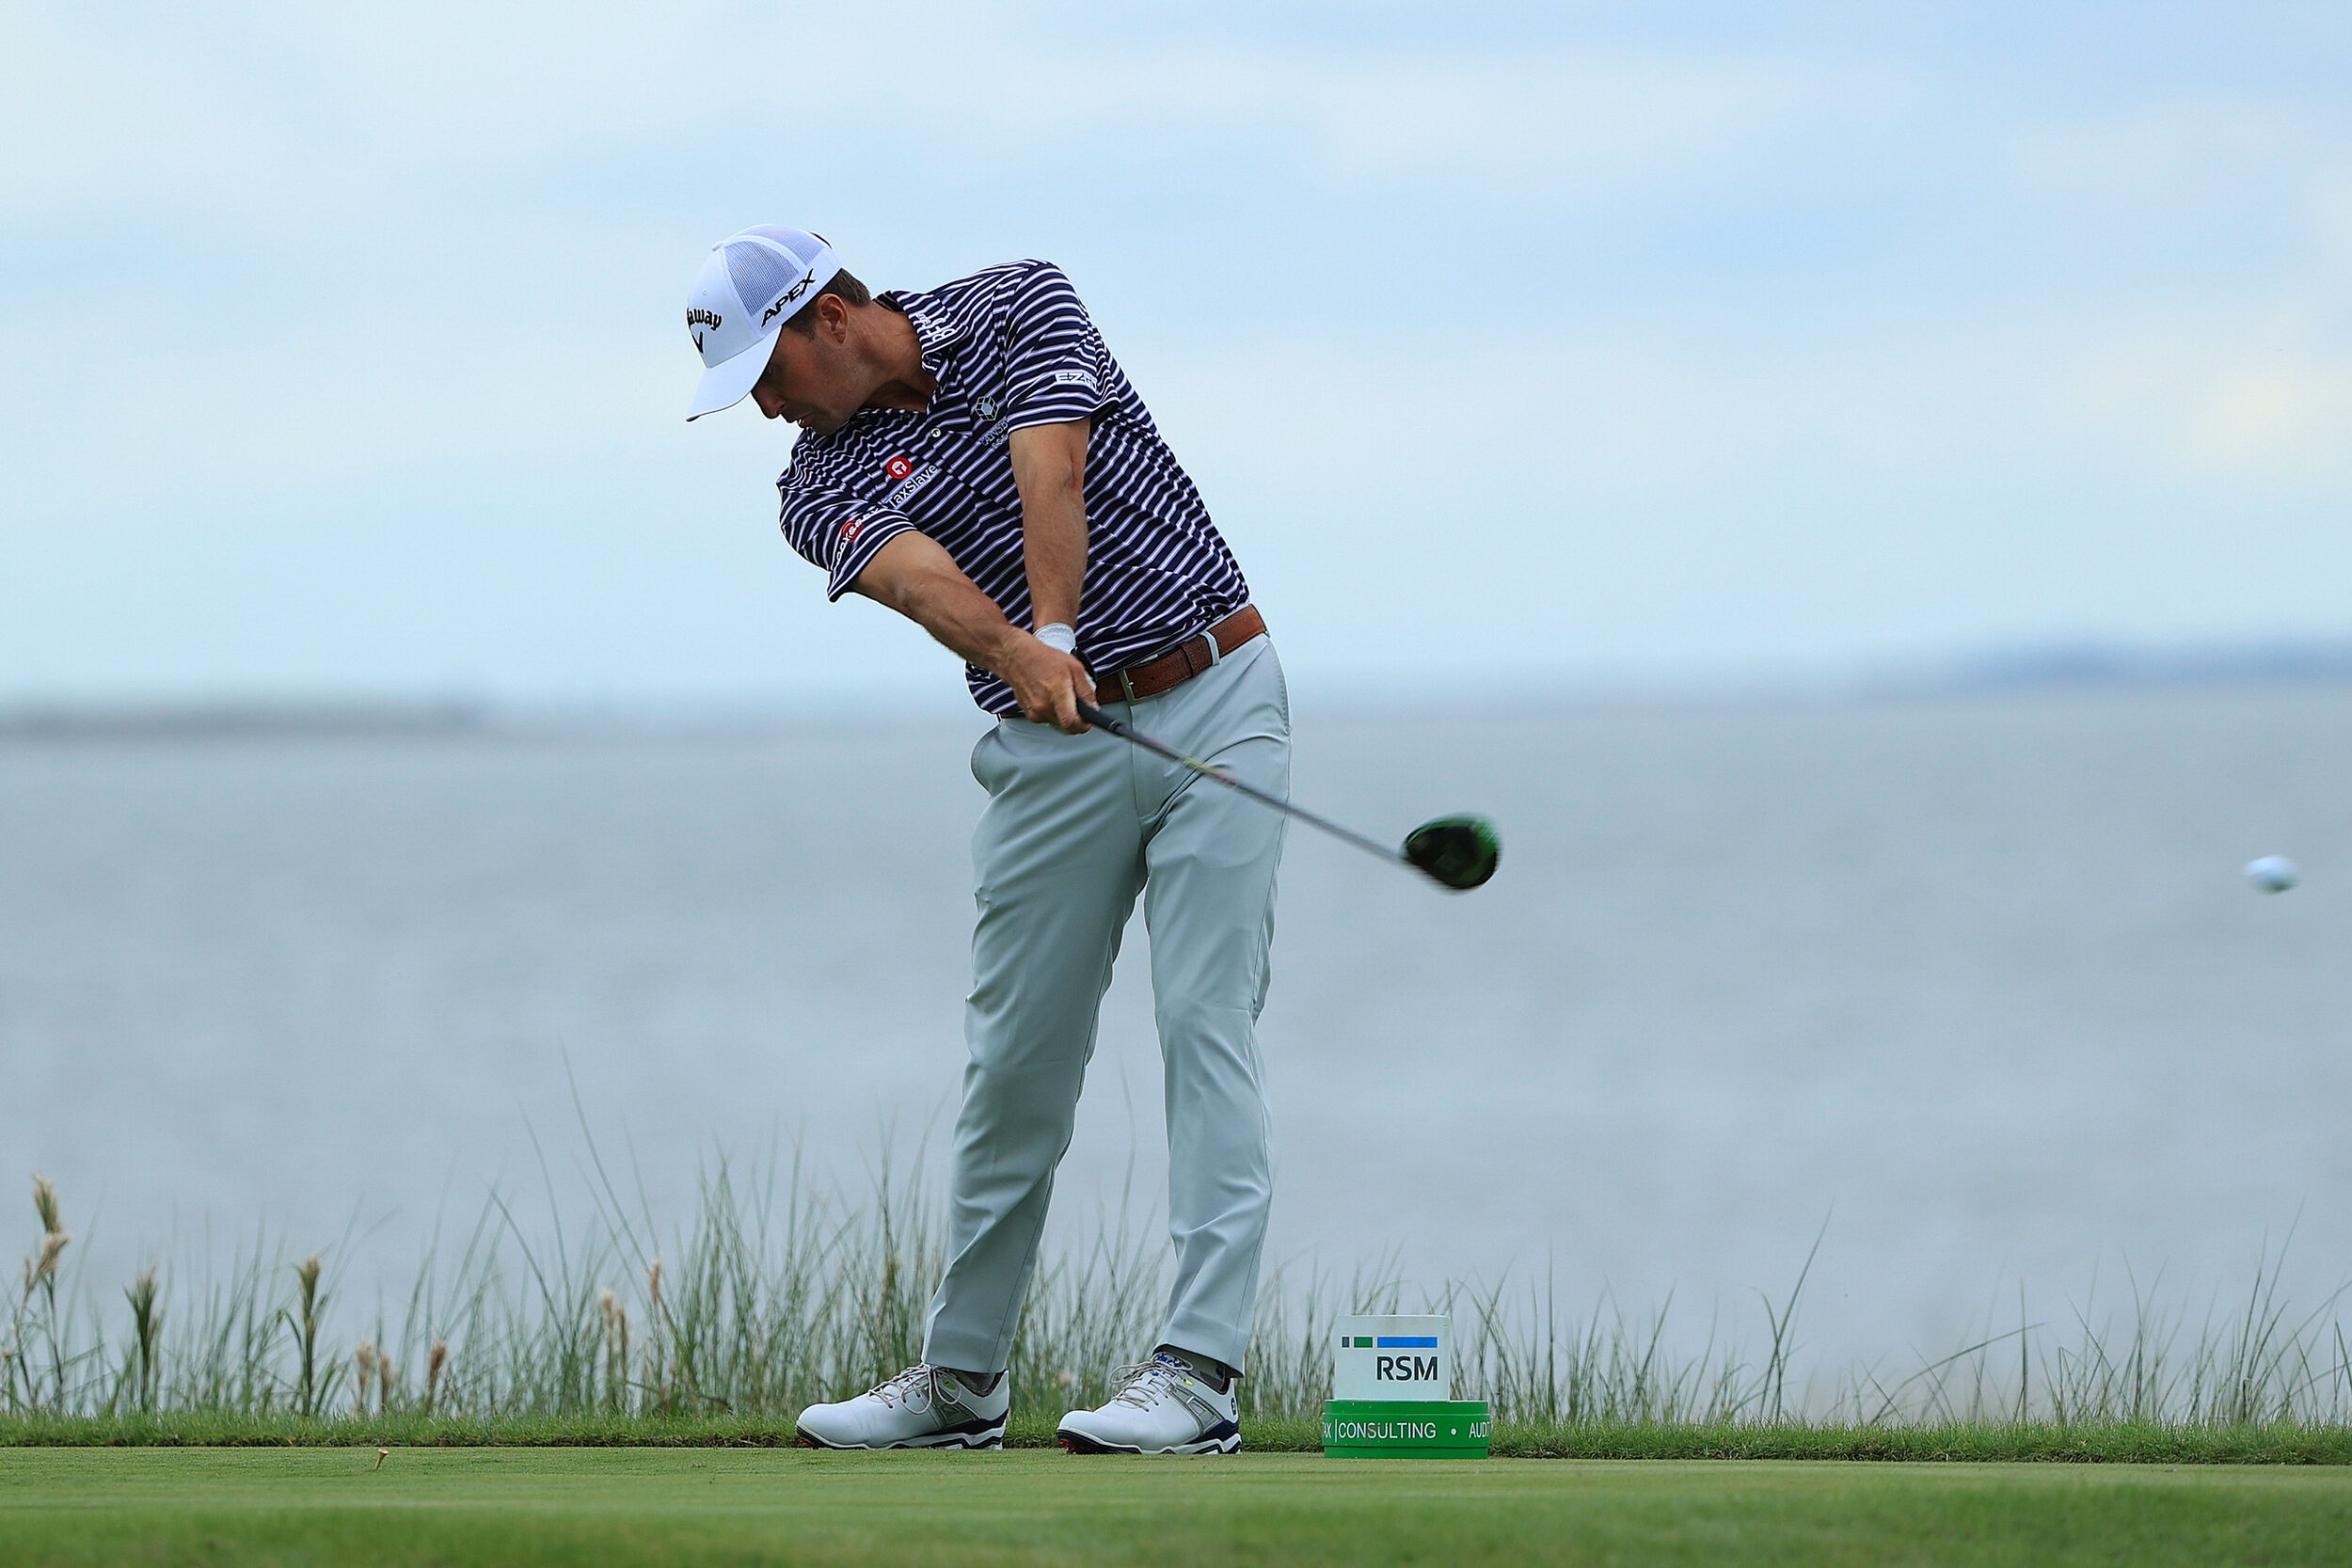  ST SIMONS ISLAND, GEORGIA - NOVEMBER 22:  Kevin Kisner of the United States plays his shot from the 14th tee during the final round of The RSM Classic at the Seaside Course at Sea Island Golf Club on November 22, 2020 in St Simons Island, Georgia. (